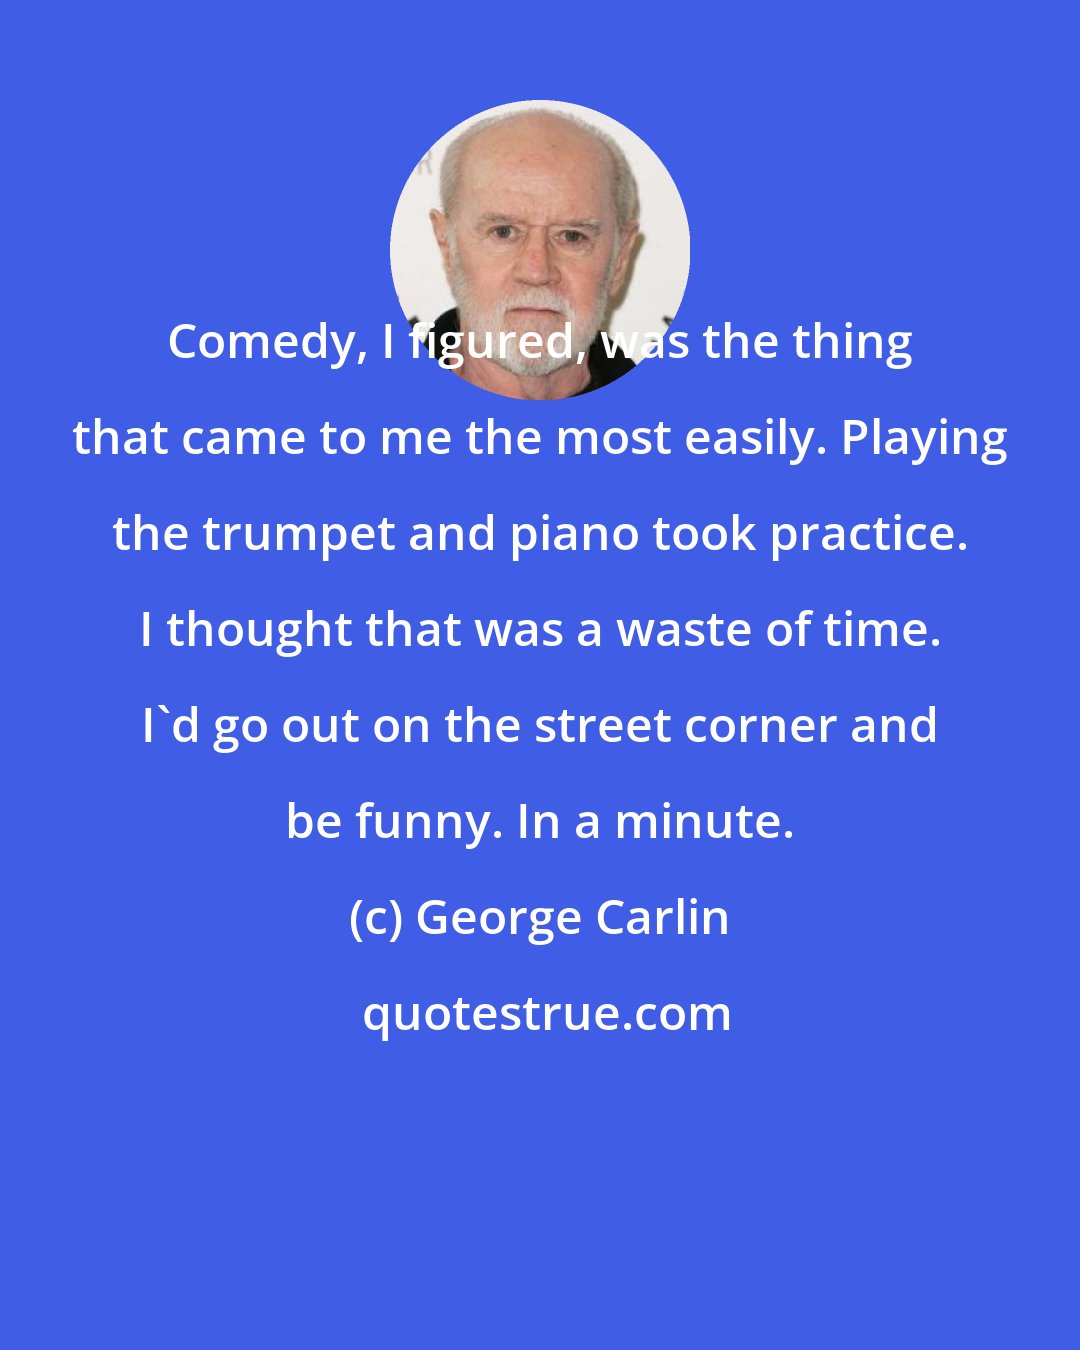 George Carlin: Comedy, I figured, was the thing that came to me the most easily. Playing the trumpet and piano took practice. I thought that was a waste of time. I'd go out on the street corner and be funny. In a minute.